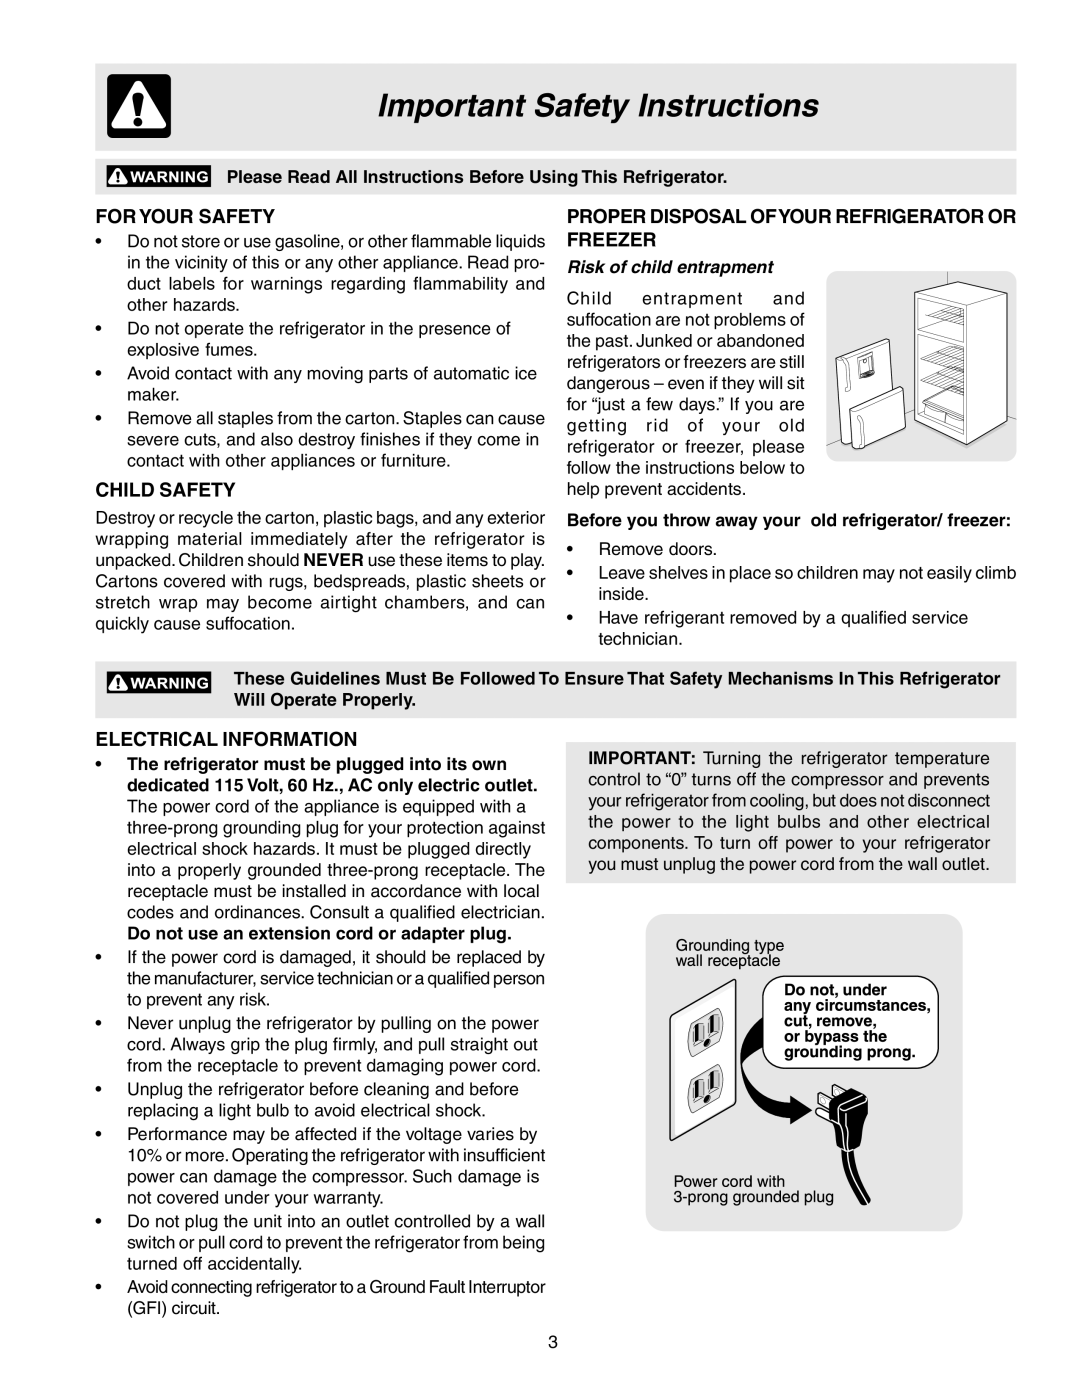 Frigidaire GLRT218WDZ2, GLRT218WDL2 Important Safety Instructions, For Your Safety, Child Safety, Electrical Information 